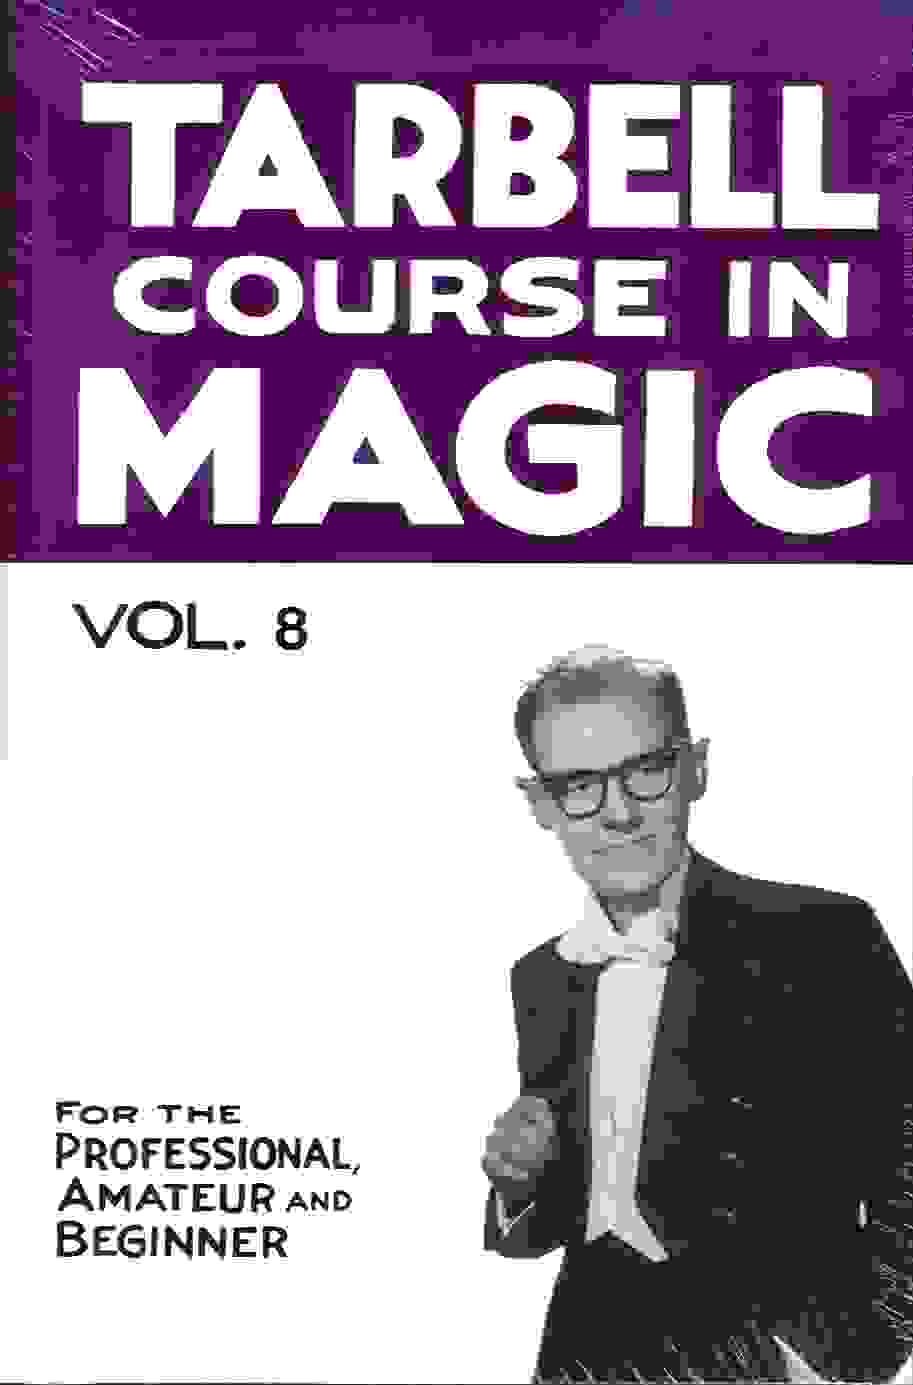 Tarbell Course in Magic - Vol. 8 (Lessons 92-103)